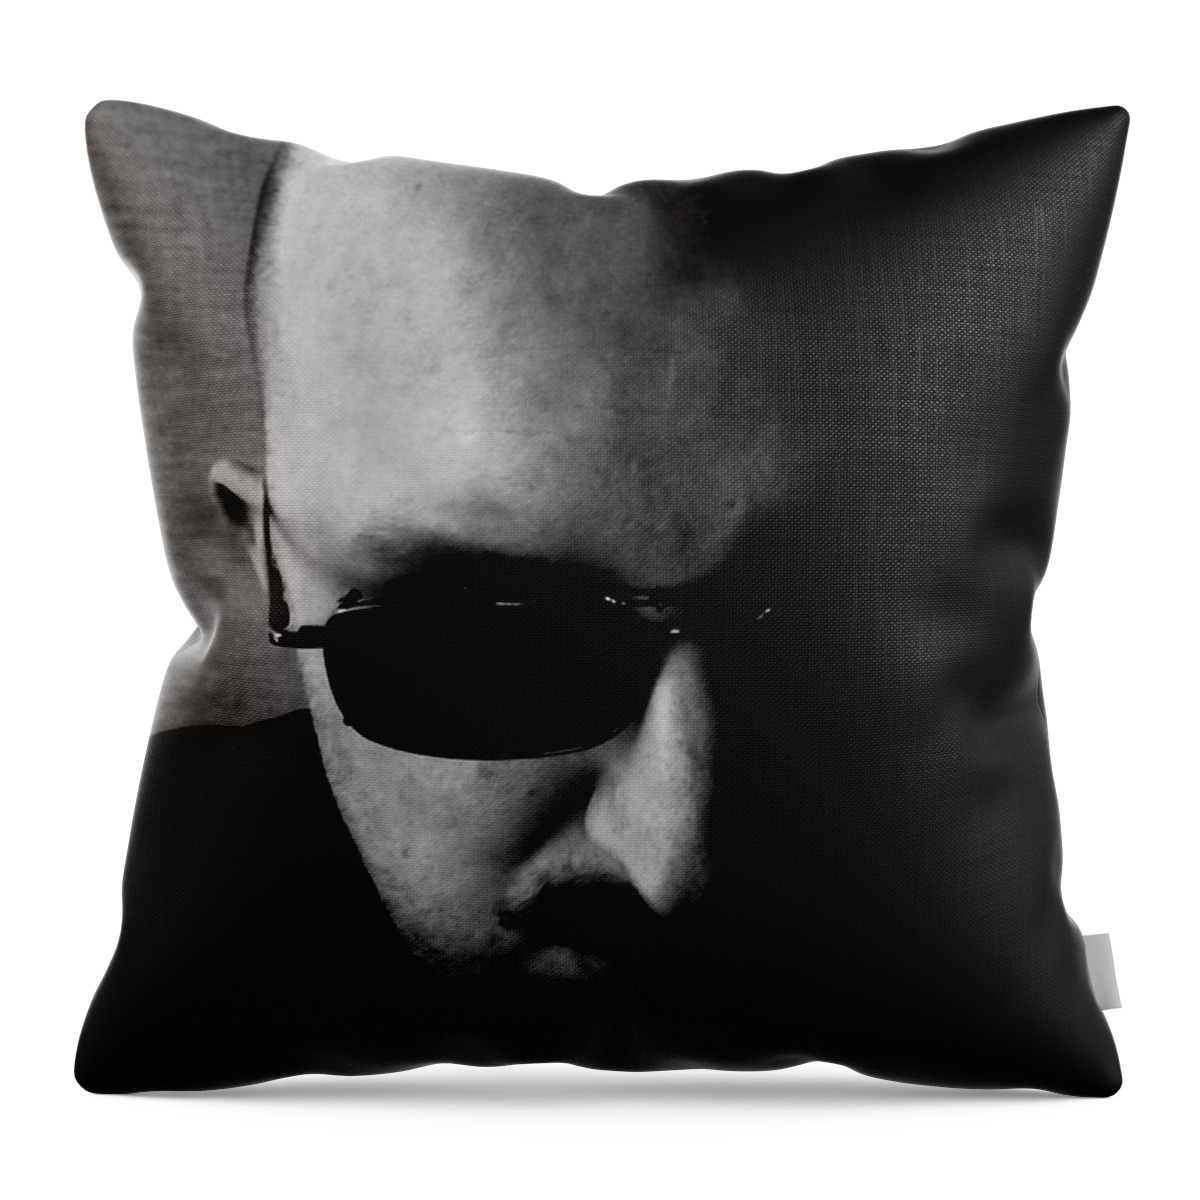  Throw Pillow featuring the photograph Grey-scale Self by Adrian Maggio